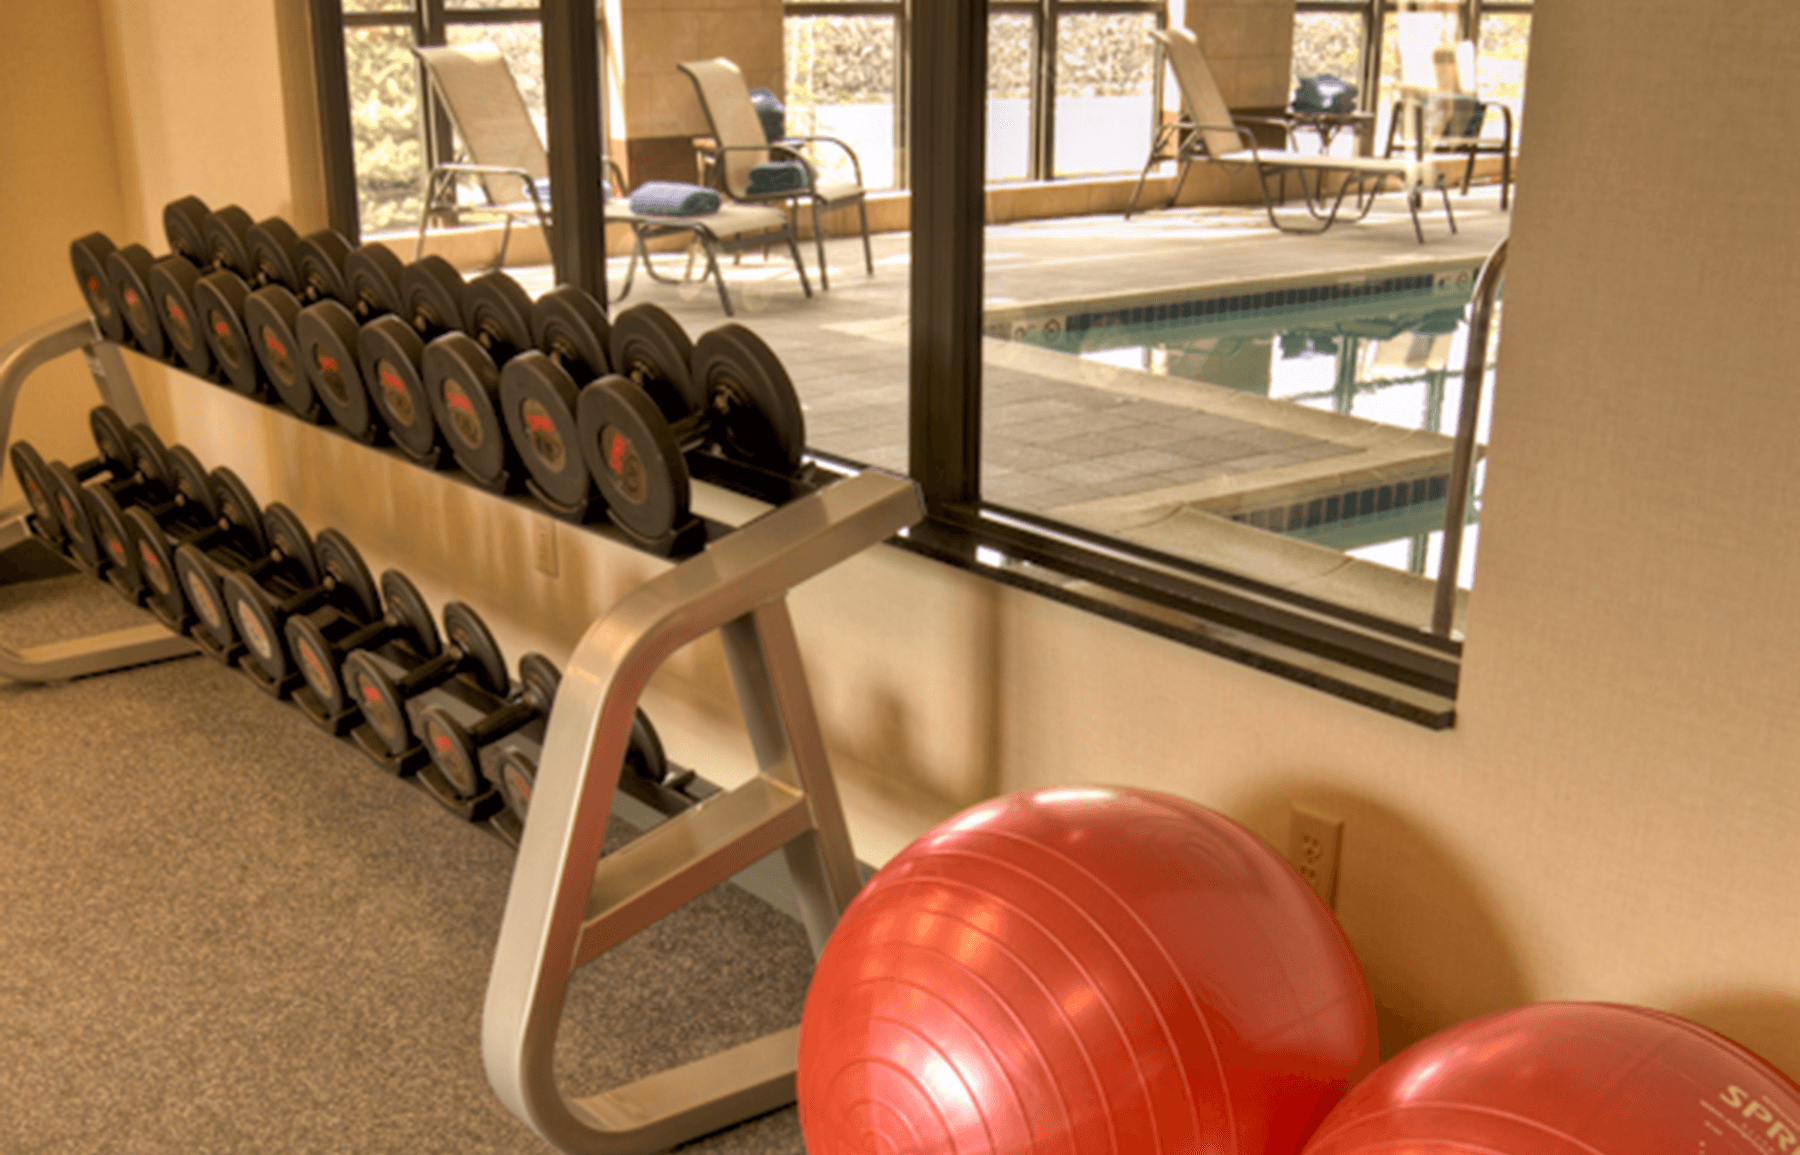  Hampton Inn and Suites Spokane fitness room weights and exercise balls 